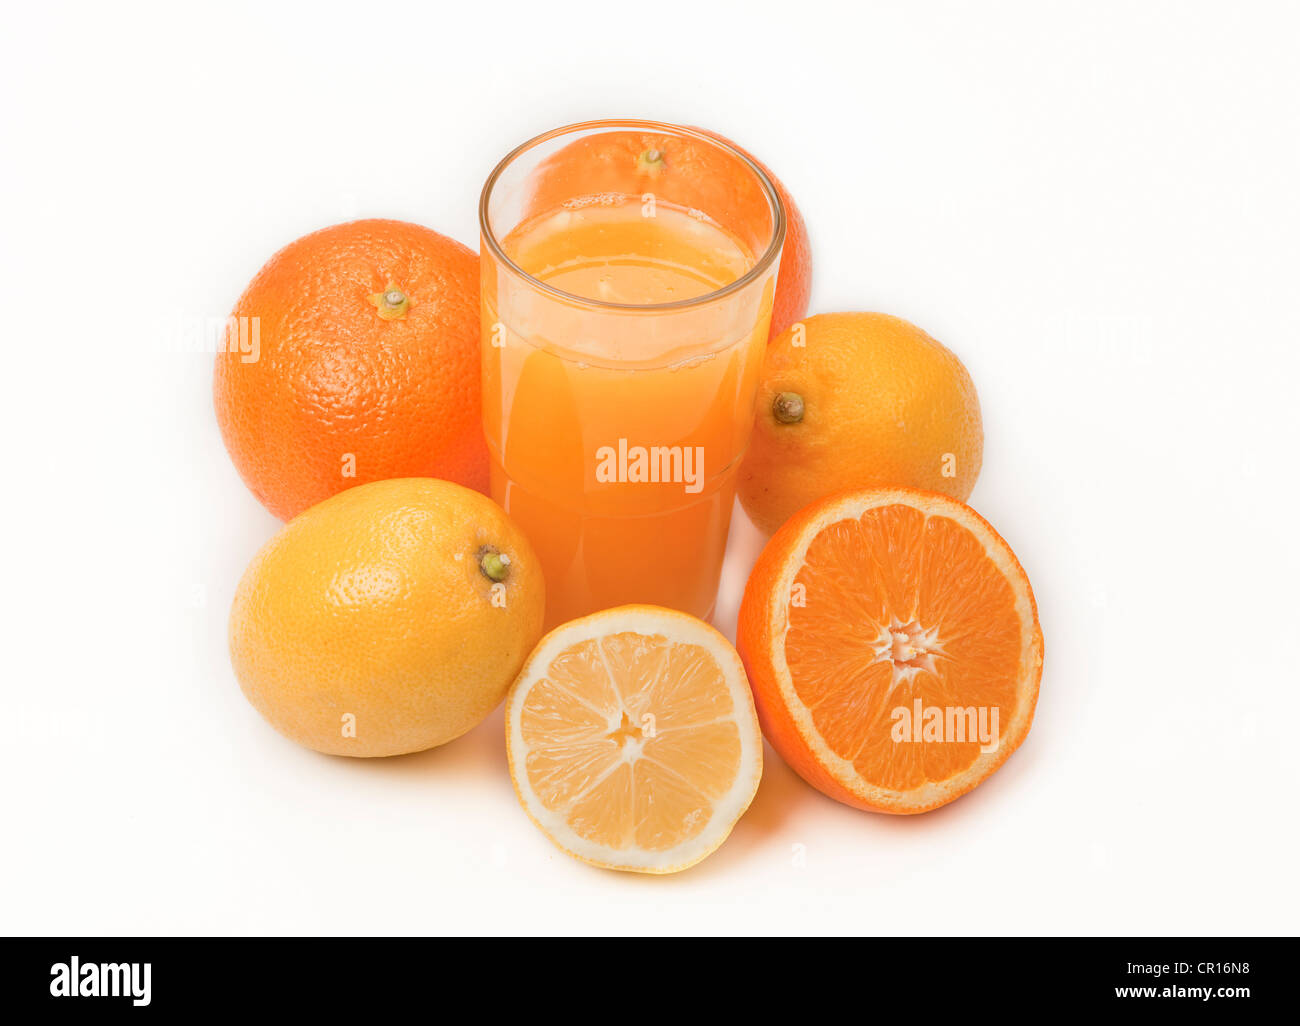 Oranges and lemons with a glass of orange juice Stock Photo